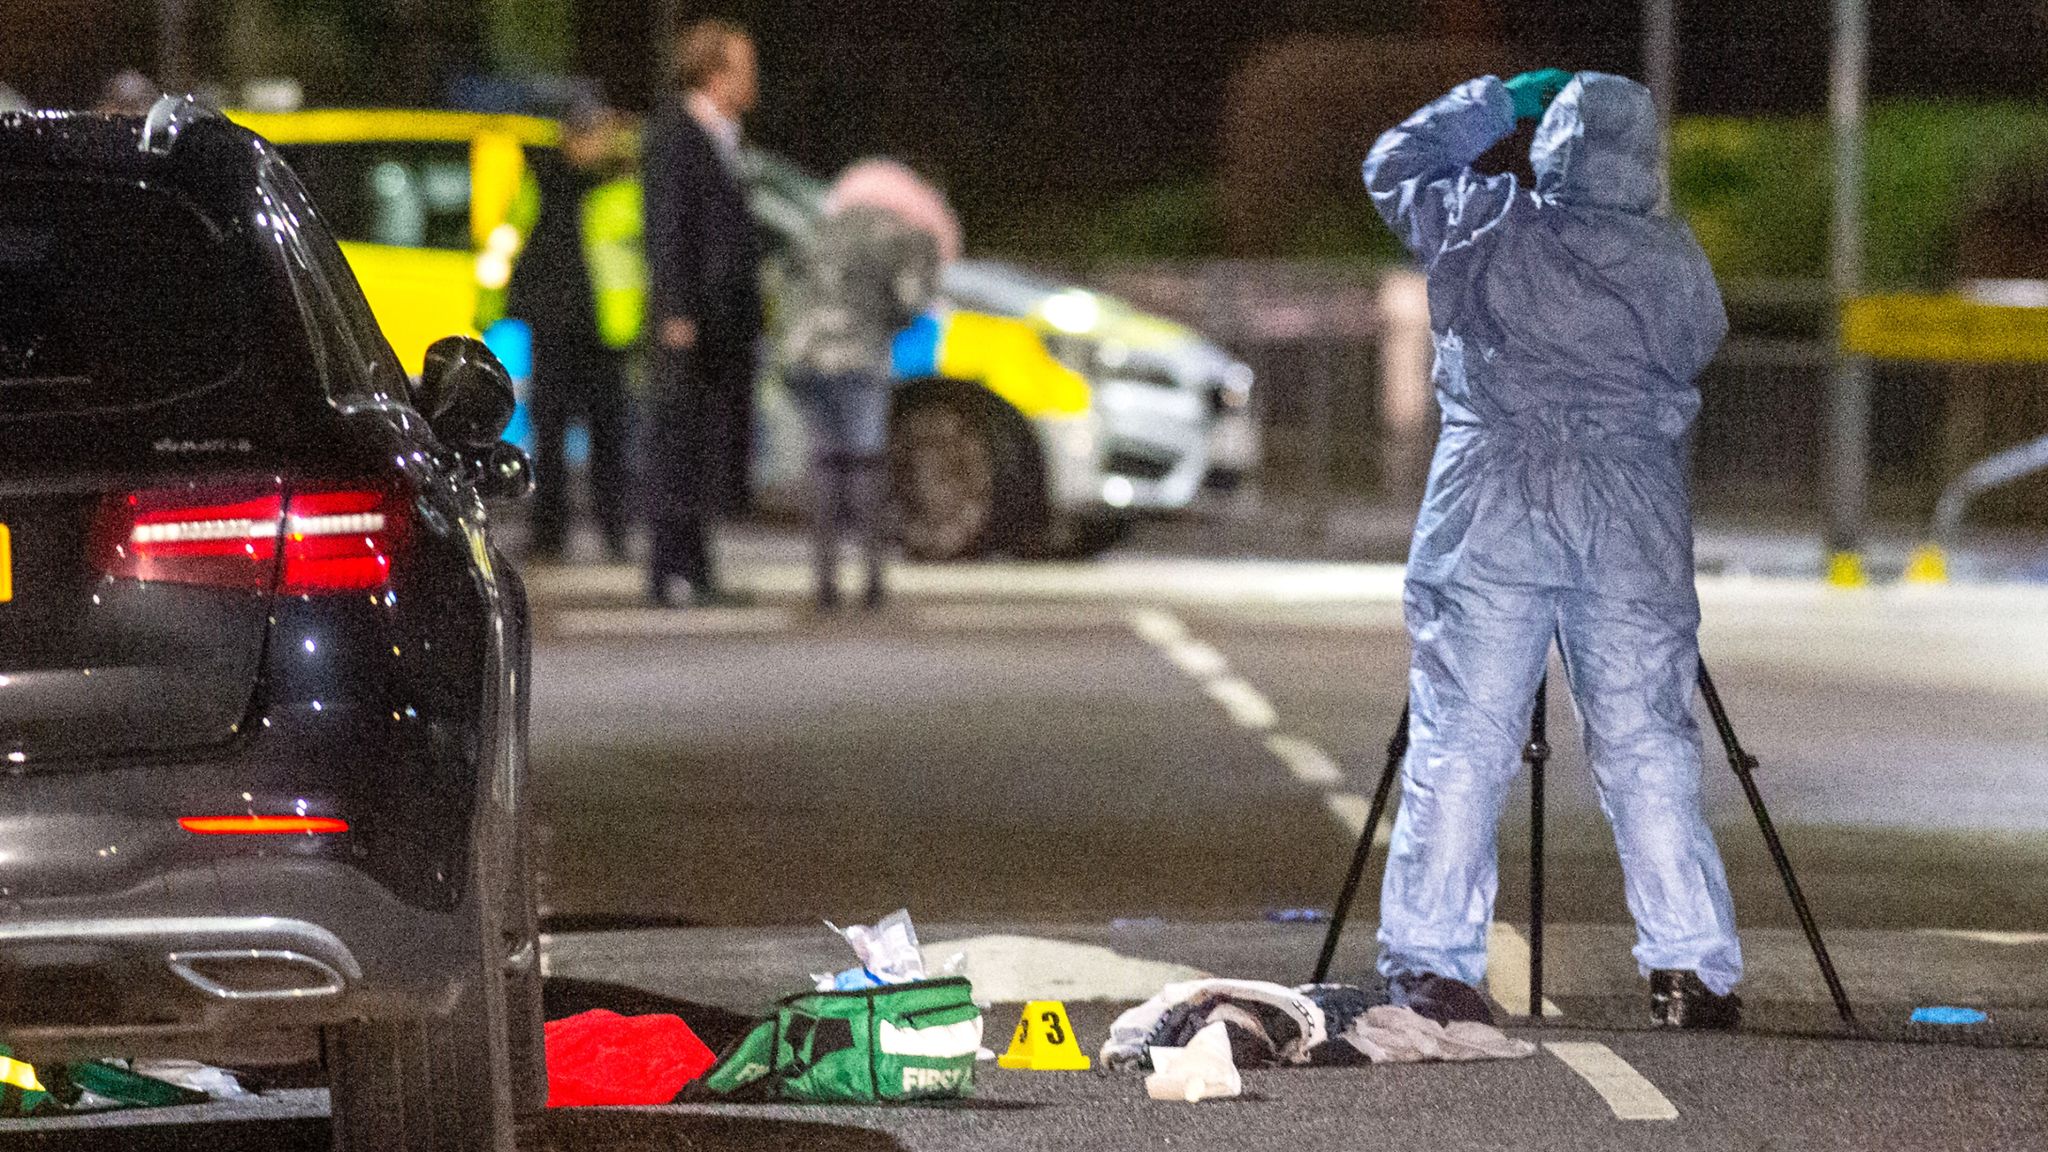 London stabbings Three stabbed in space of 90 minutes amid spate of